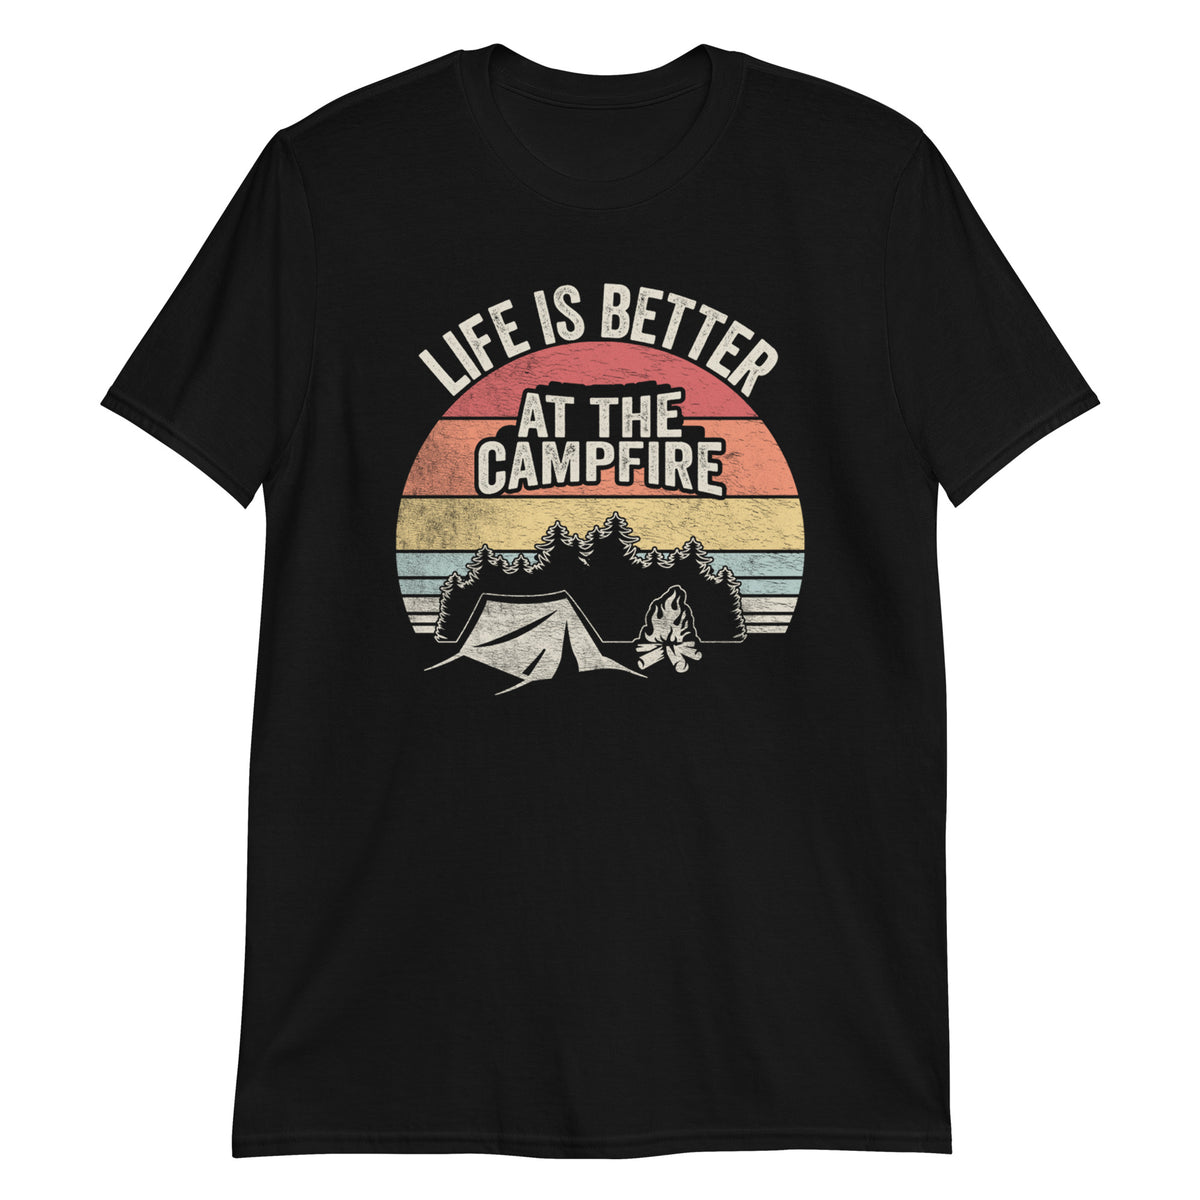 Life is Better at The Campfire T-Shirt